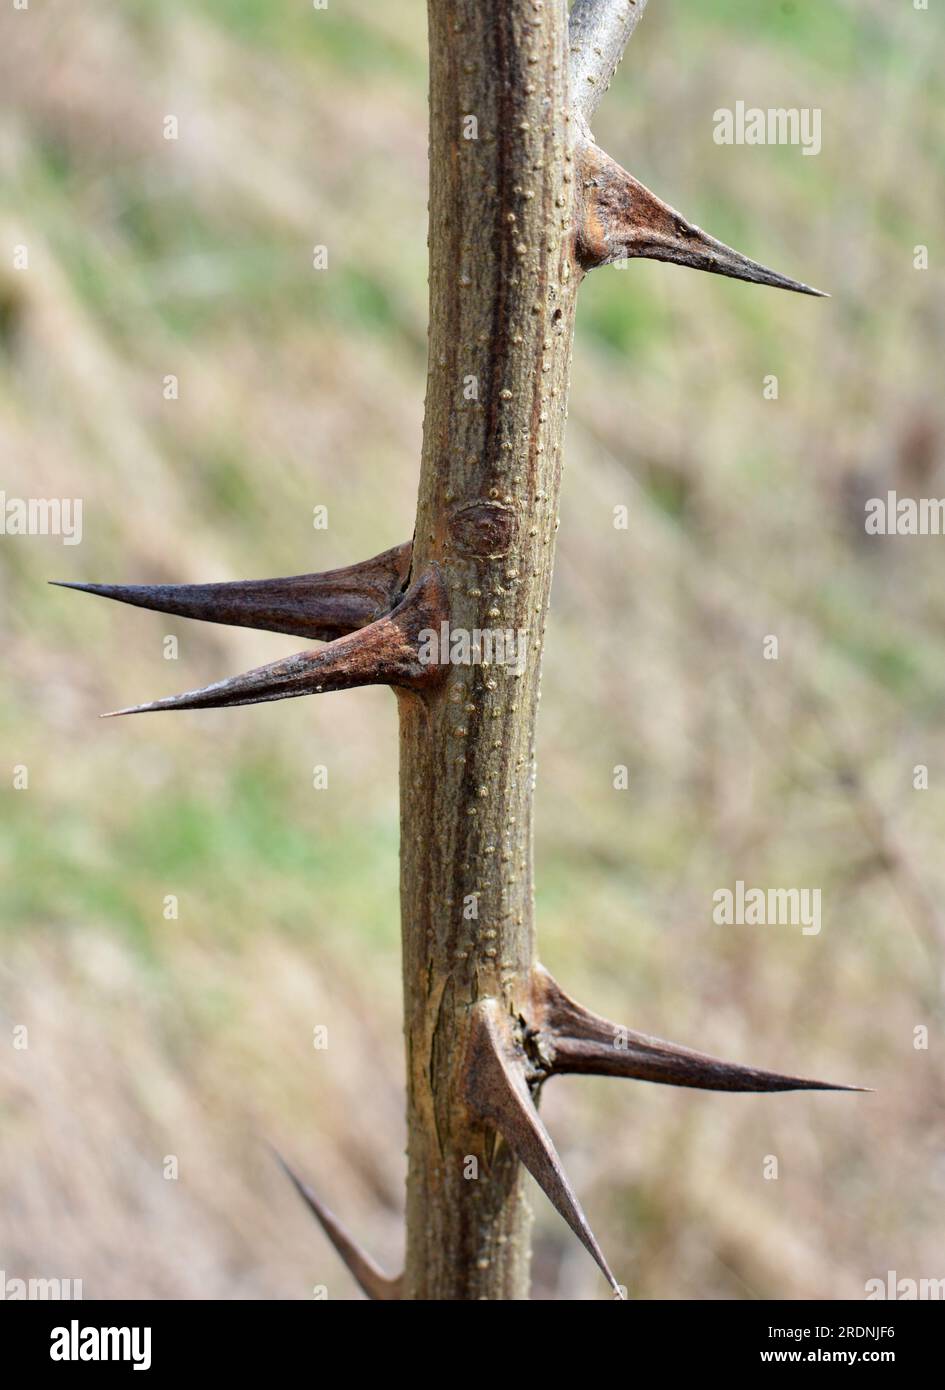 Sharp thorns on a branch of a bush and a tree close up Stock Photo